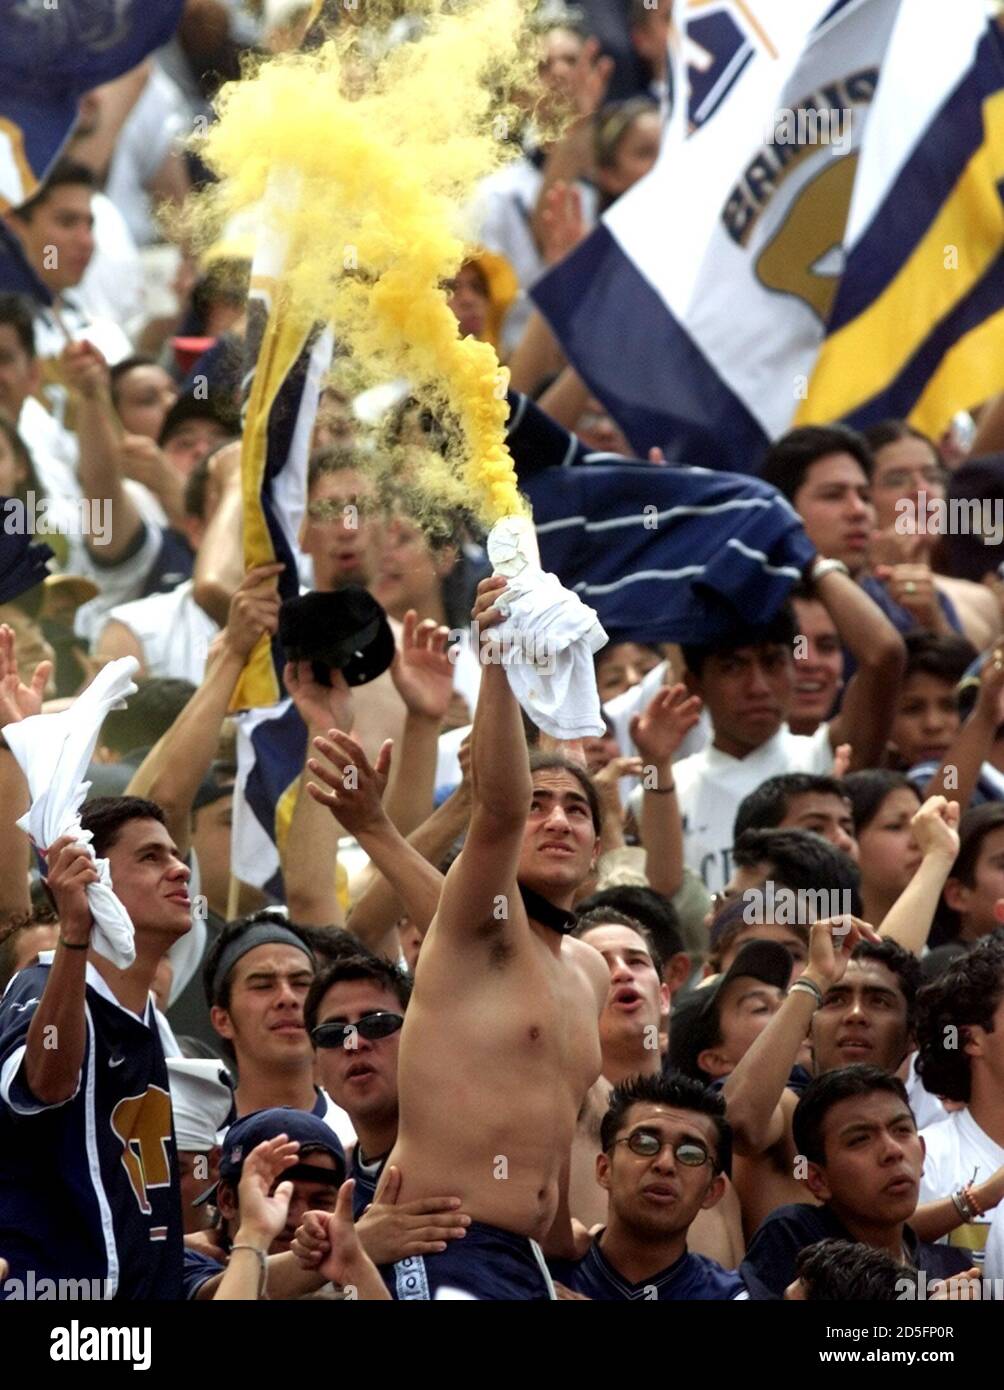 National Autonomous University of Mexico (UNAM) Pumas fans celebrate after  their team scored its second goal against Necaxa Rayos during their  national league quarterfinals second leg in the University Stadium, May 21.